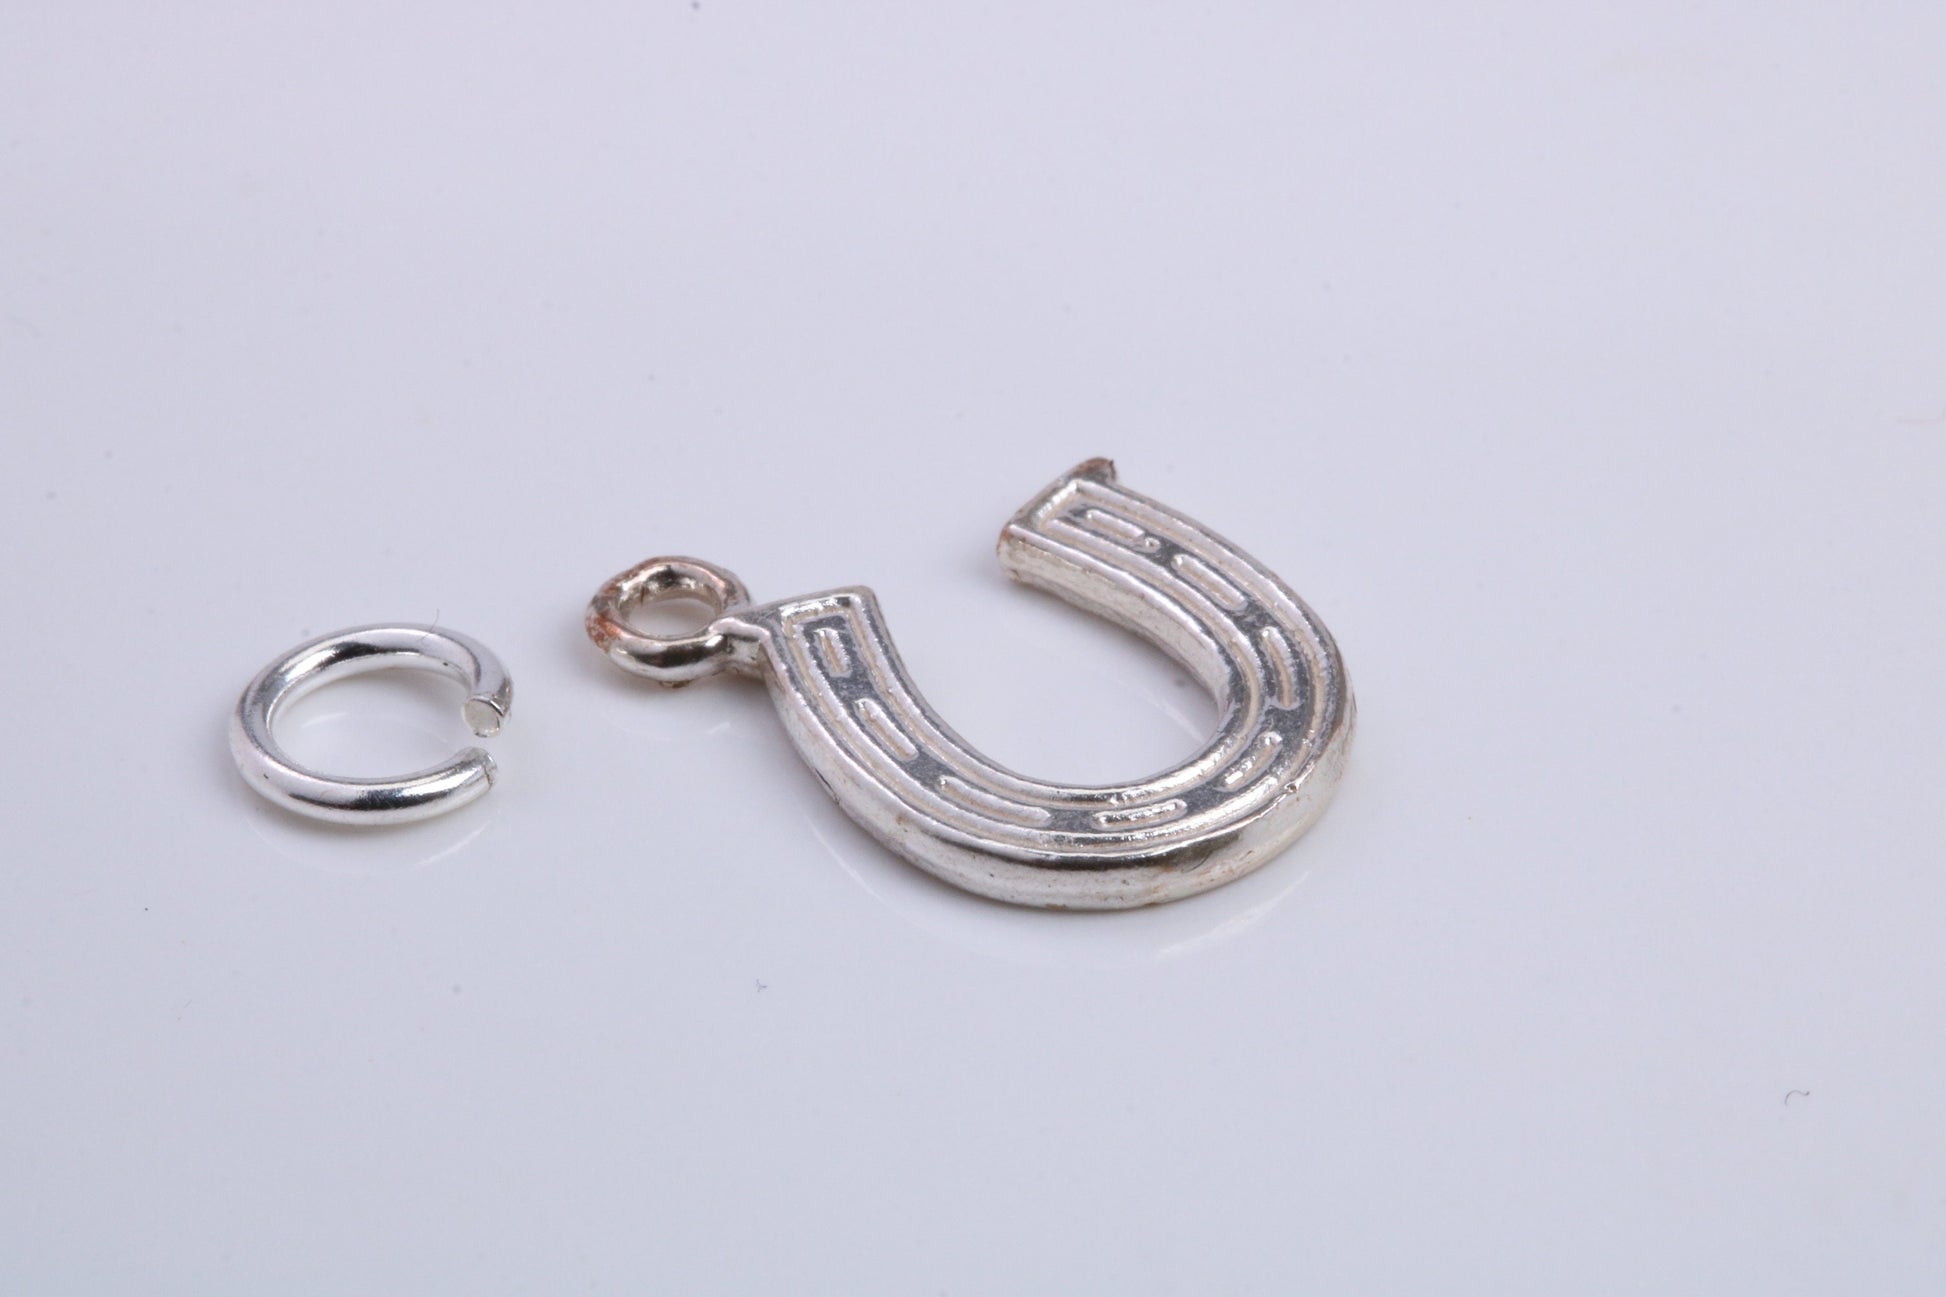 Horse Shoe Charm, Traditional Charm, Made from Solid 925 Grade Sterling Silver, Complete with Attachment Link